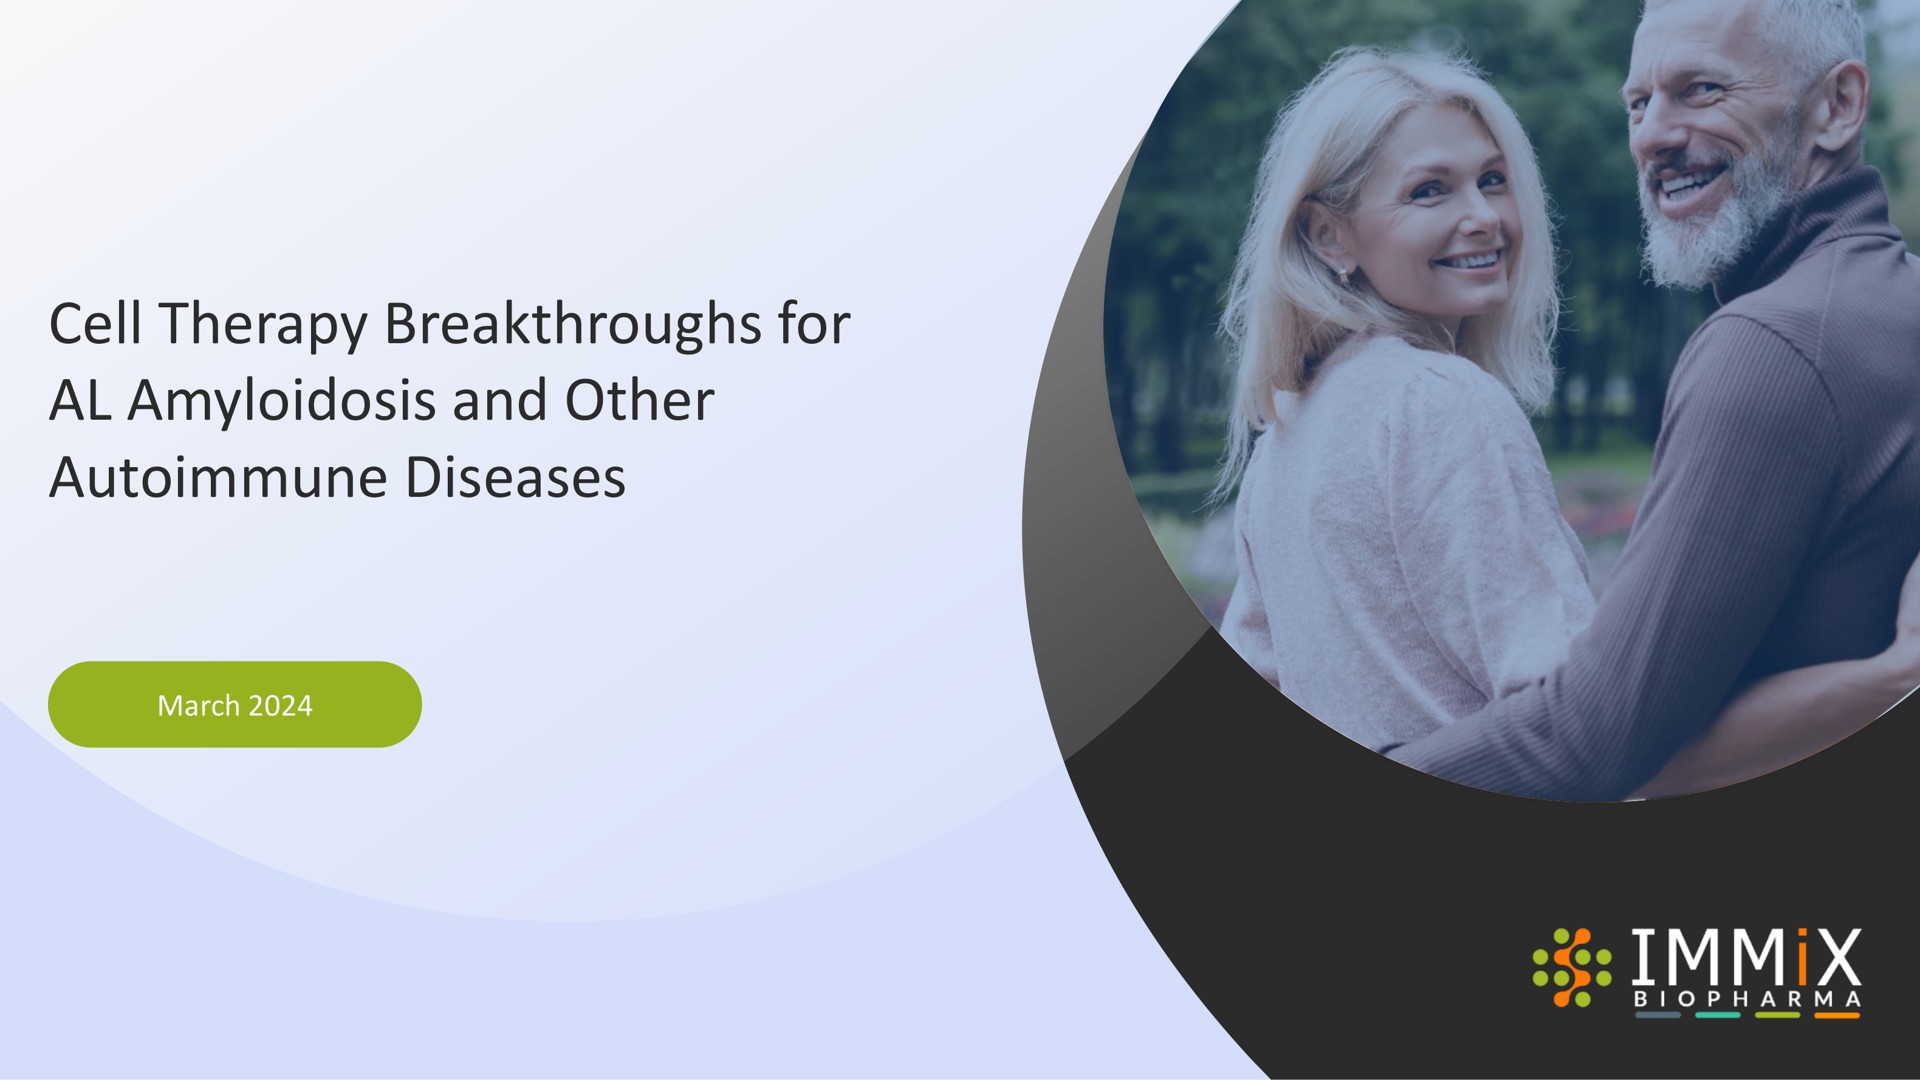 cell therapy breakthroughs for amyloidosis and other diseases | Immix Biopharma